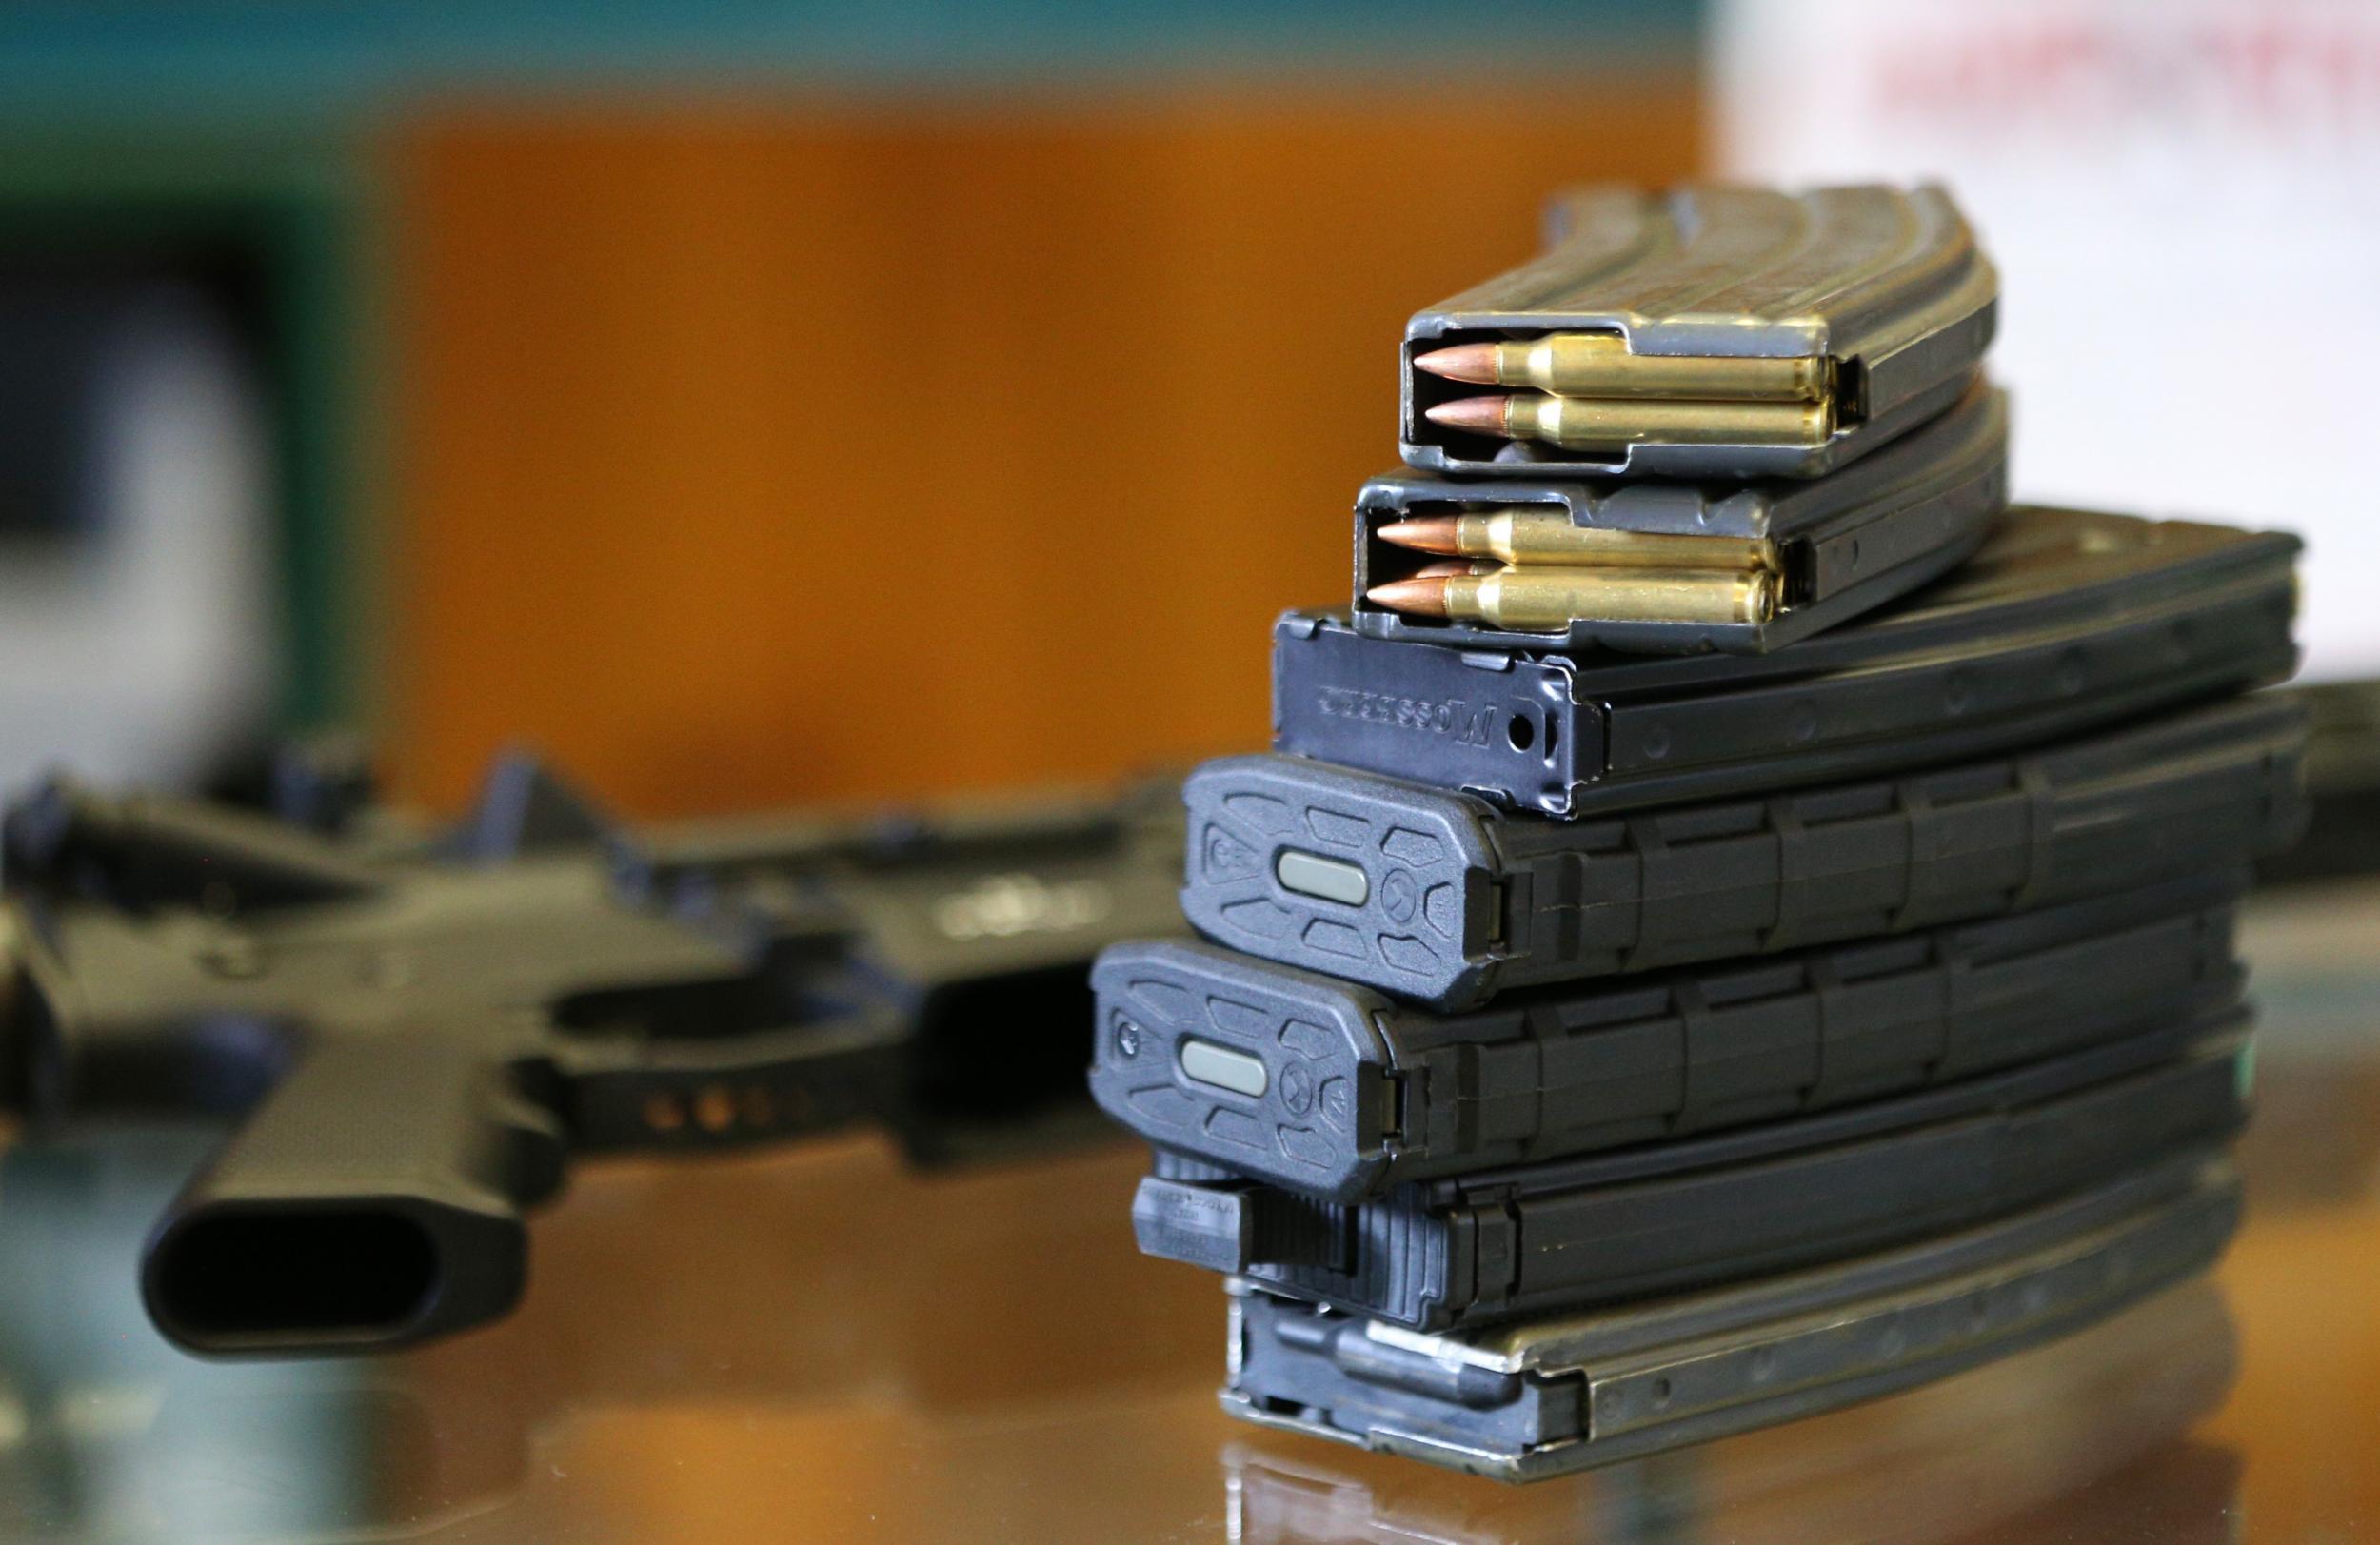 Two 30 round clips, filled with .223 cartridges and other high capacity clips for an AR-15 are shown here at Good Guys Guns & Range